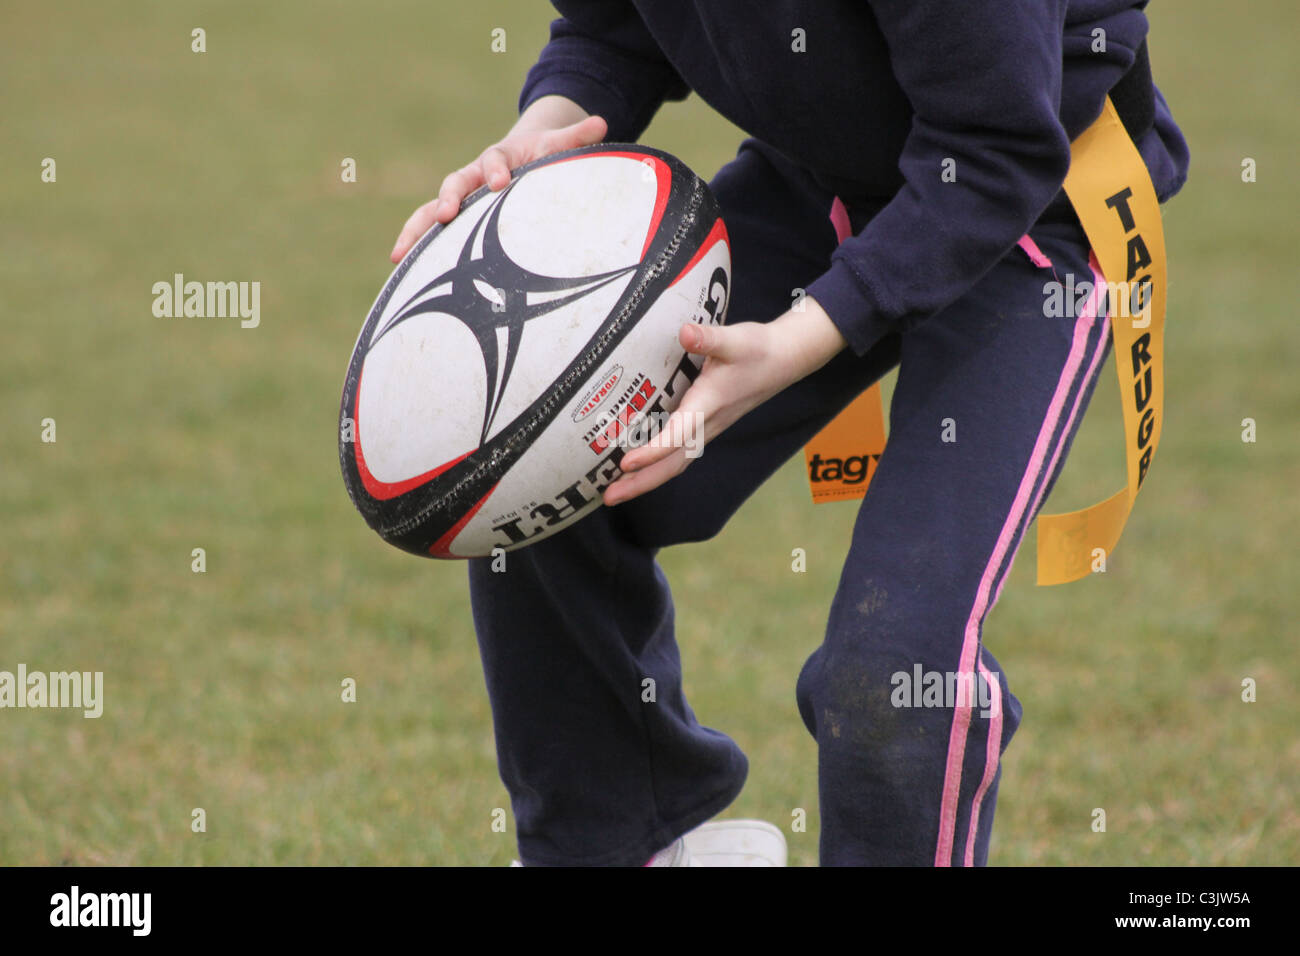 Young child running with a rugby ball playing tag rugby Stock Photo